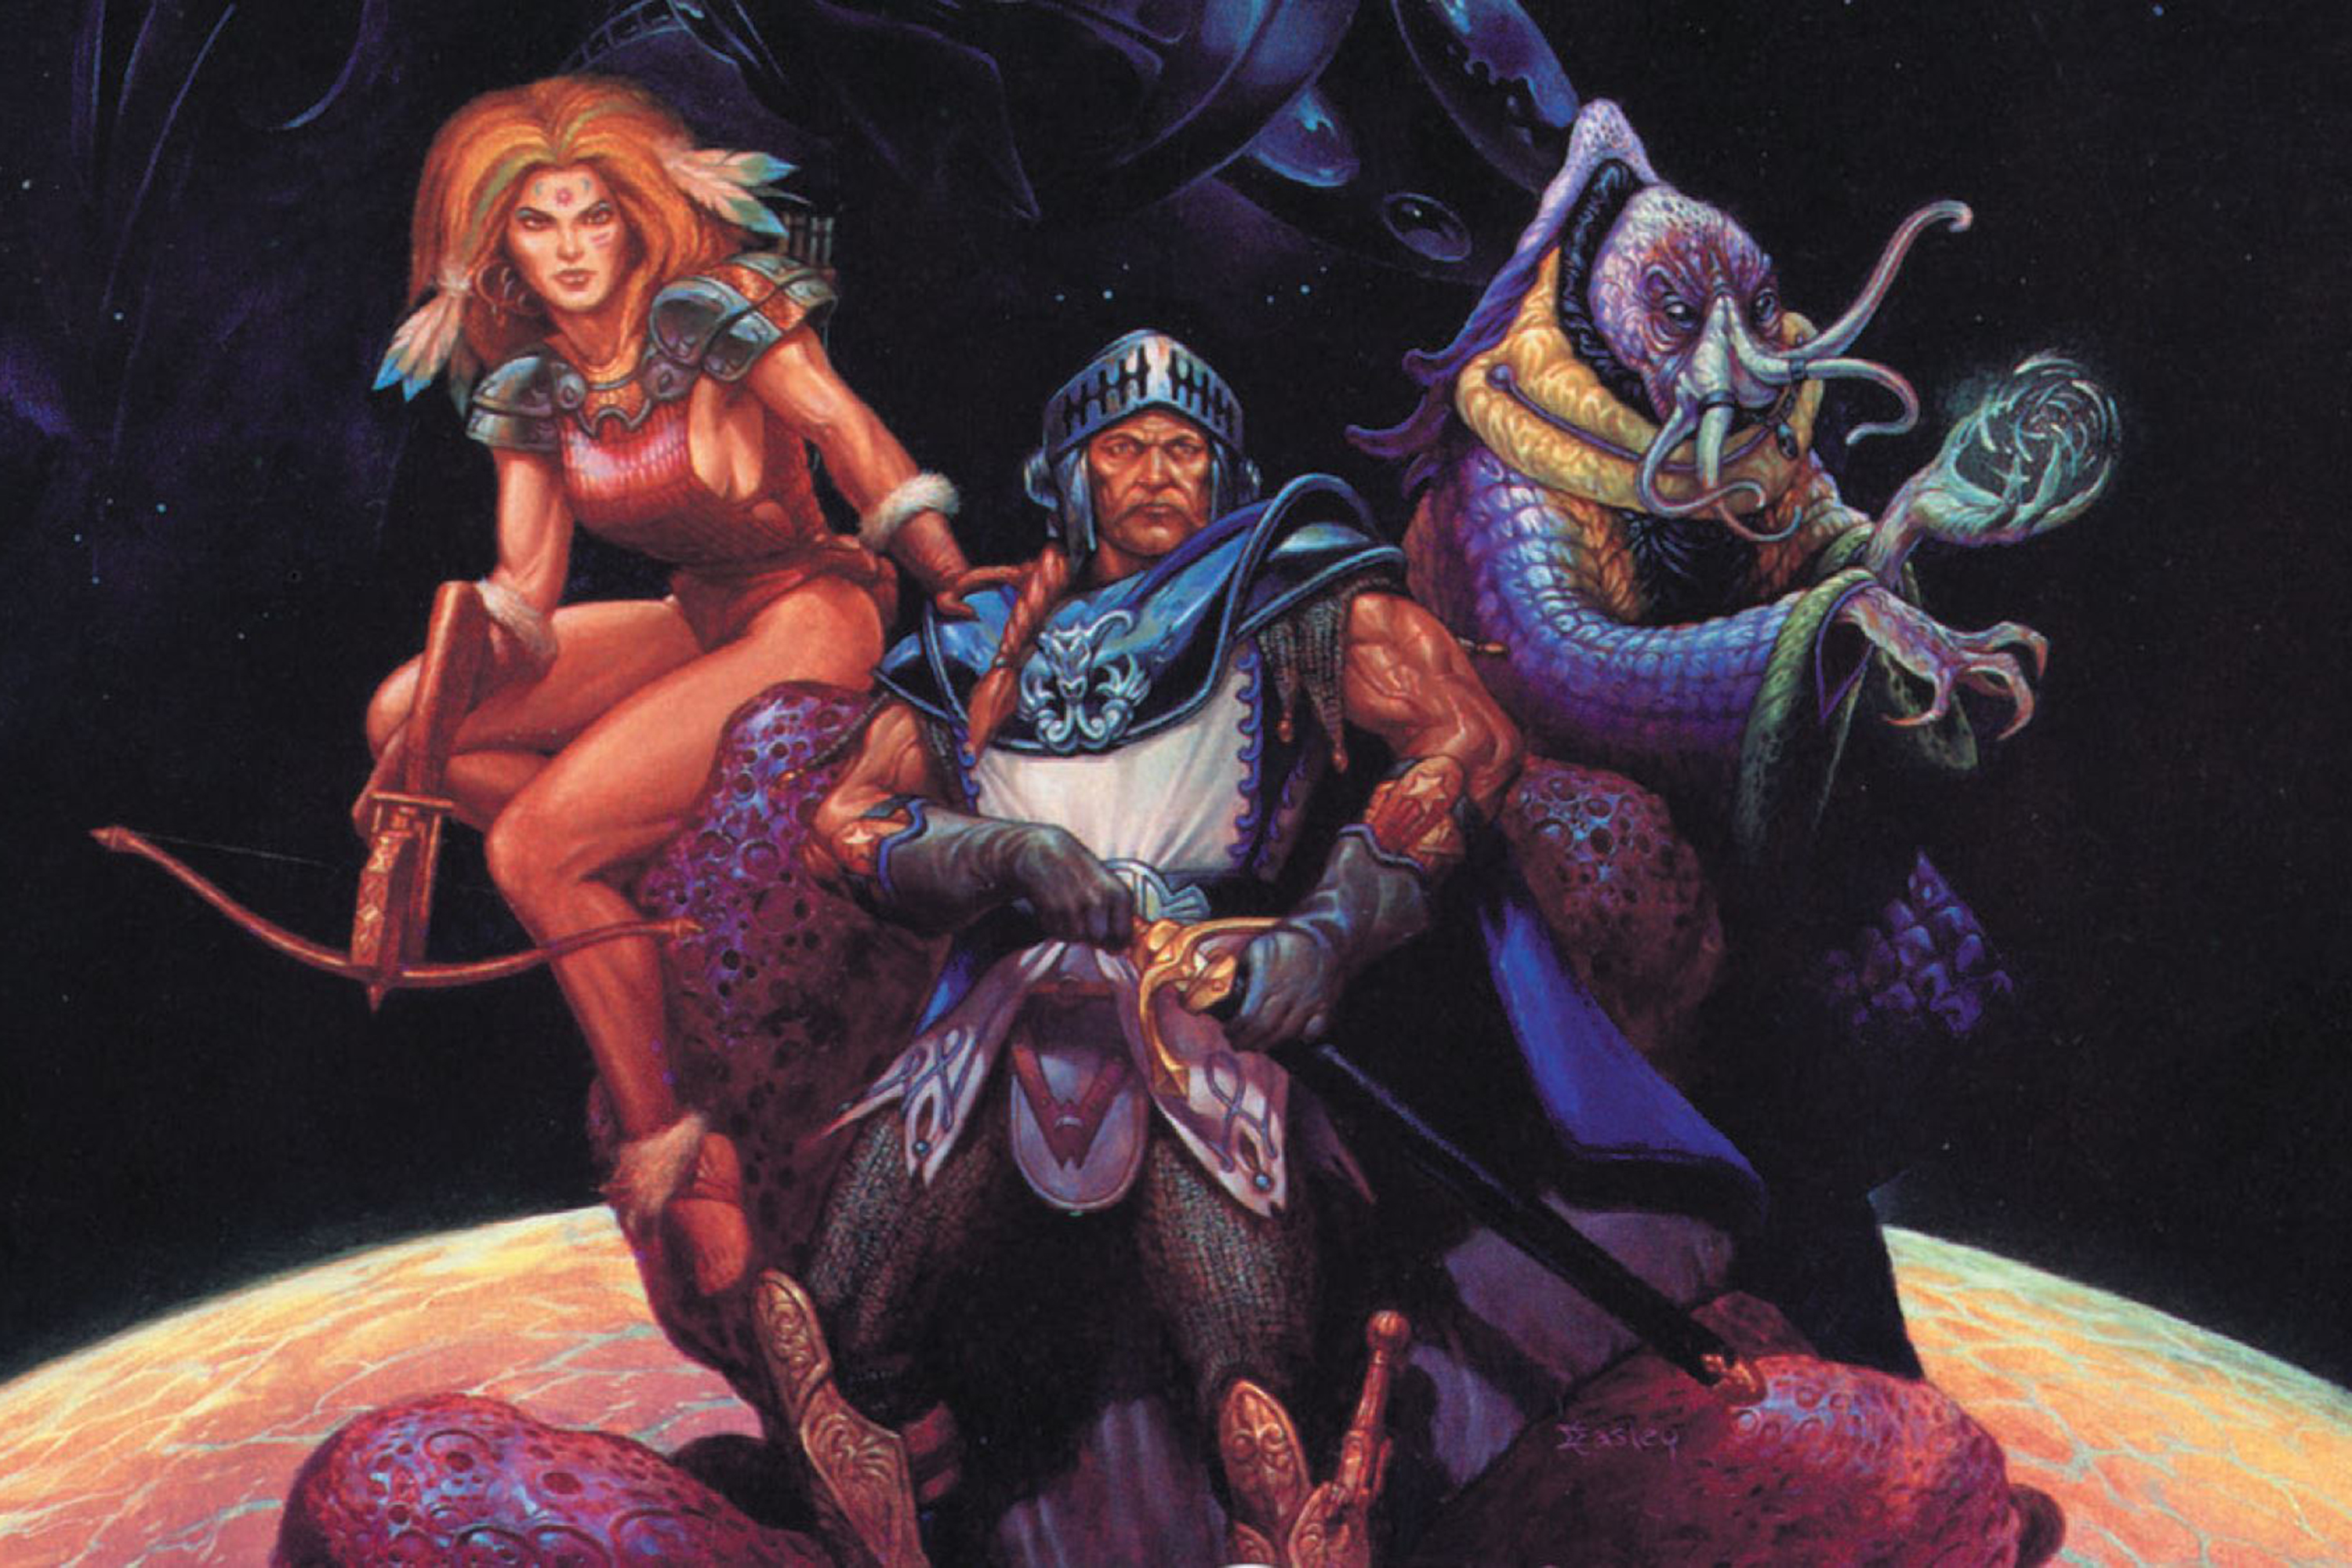 Cover art for the original Spelljammer features a stereotypical knight in orbit.